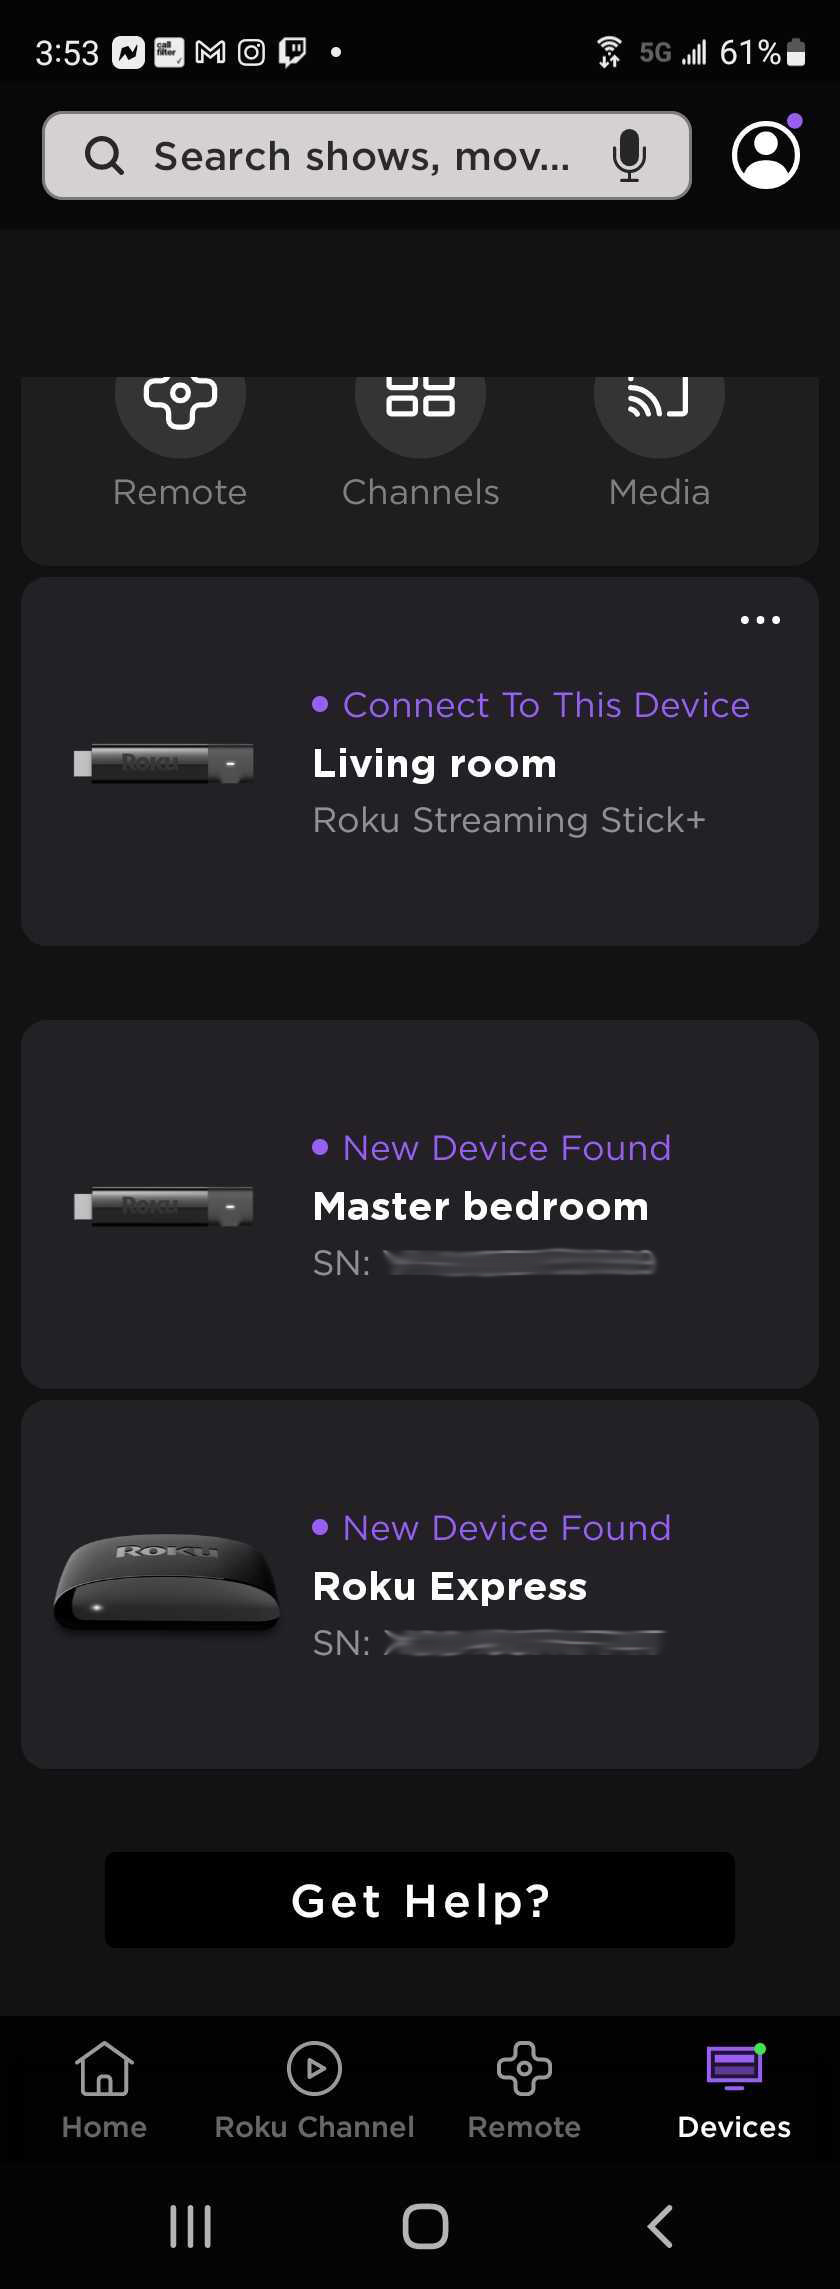 The Devices tab in the Roku Android app